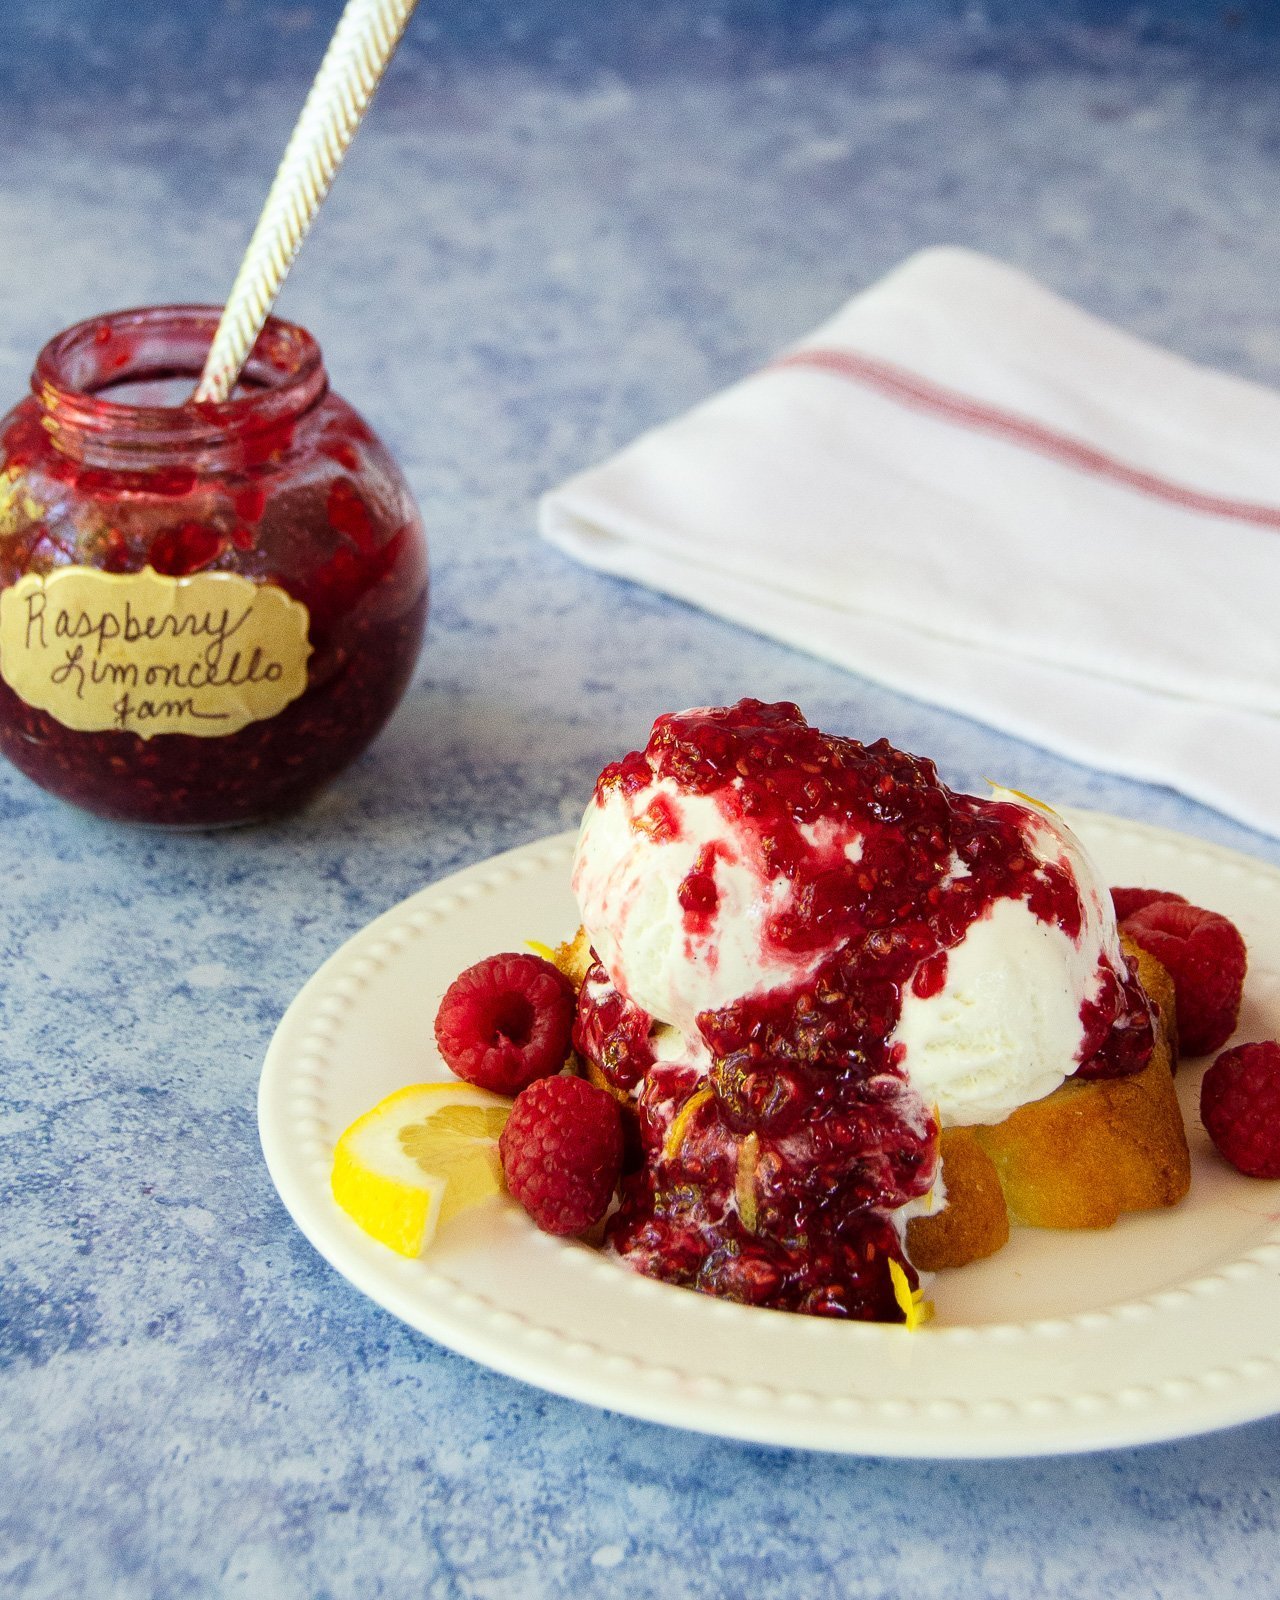 Raspberry Limoncello Jam | Blue Jean Chef - Meredith Laurence